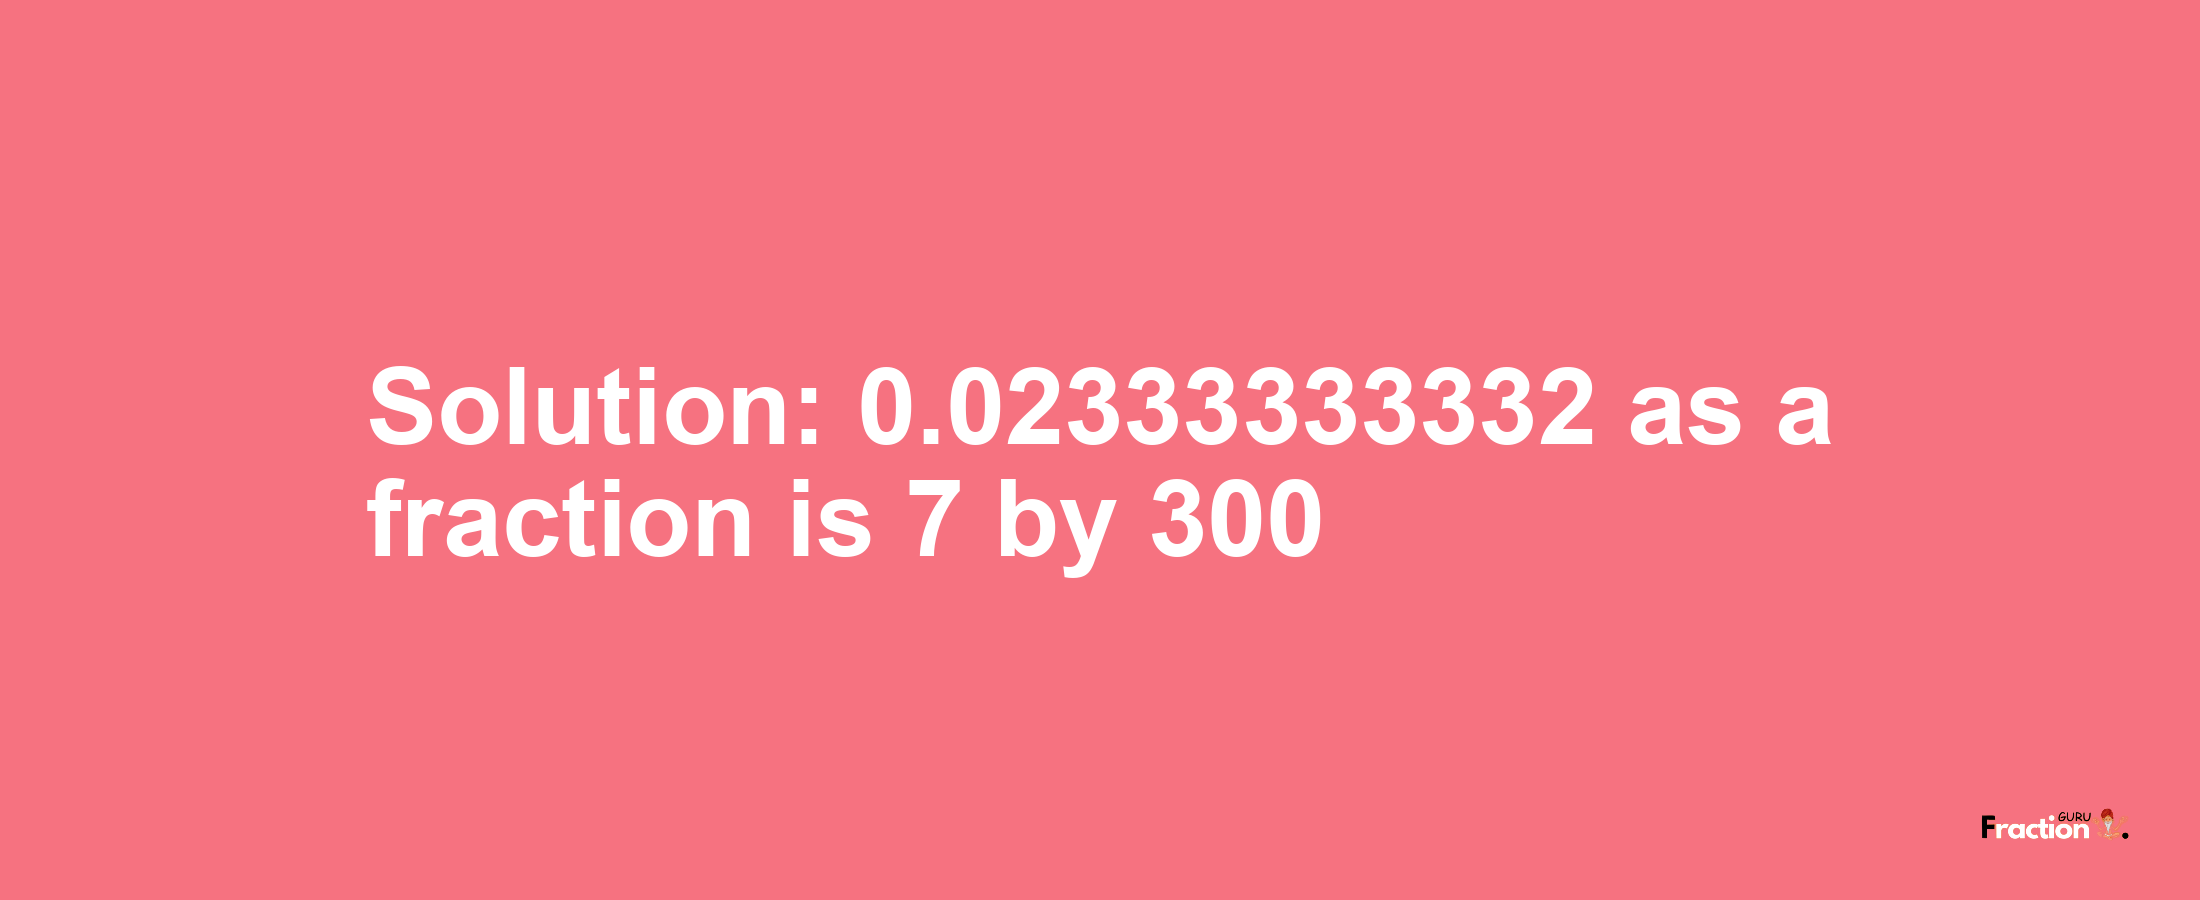 Solution:0.02333333332 as a fraction is 7/300